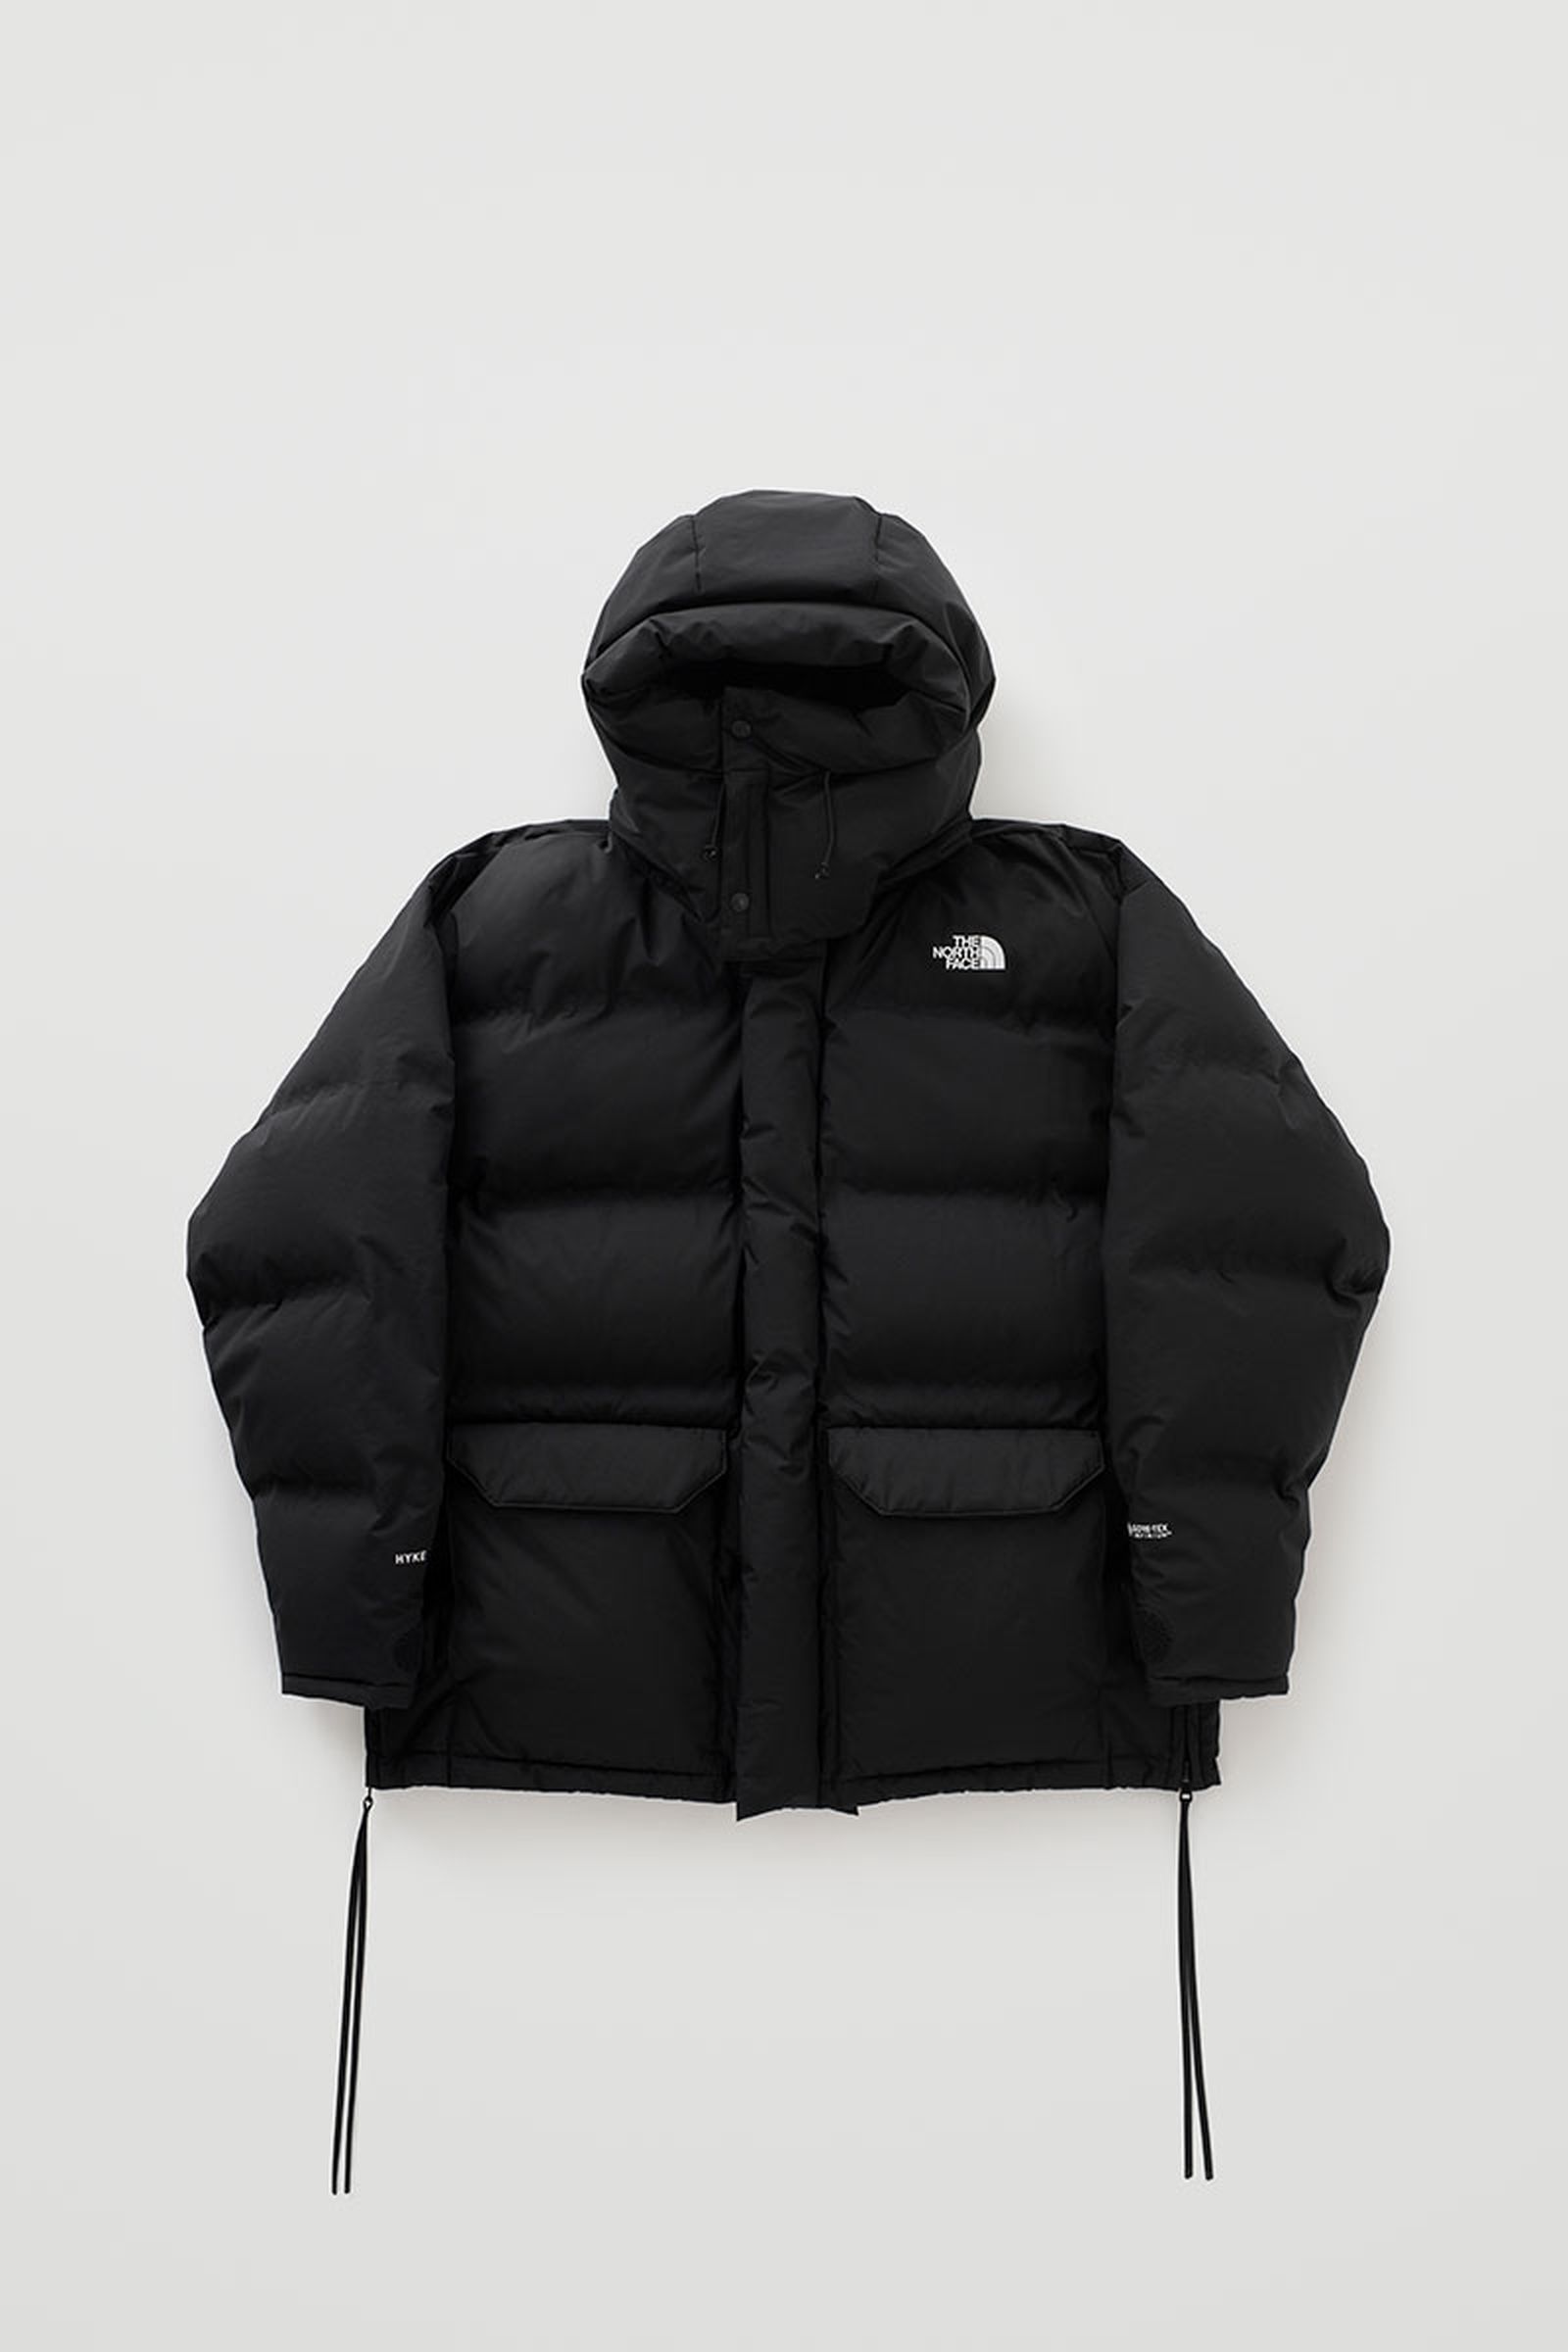 The North Face and Hyke Unveil FW19 Collection